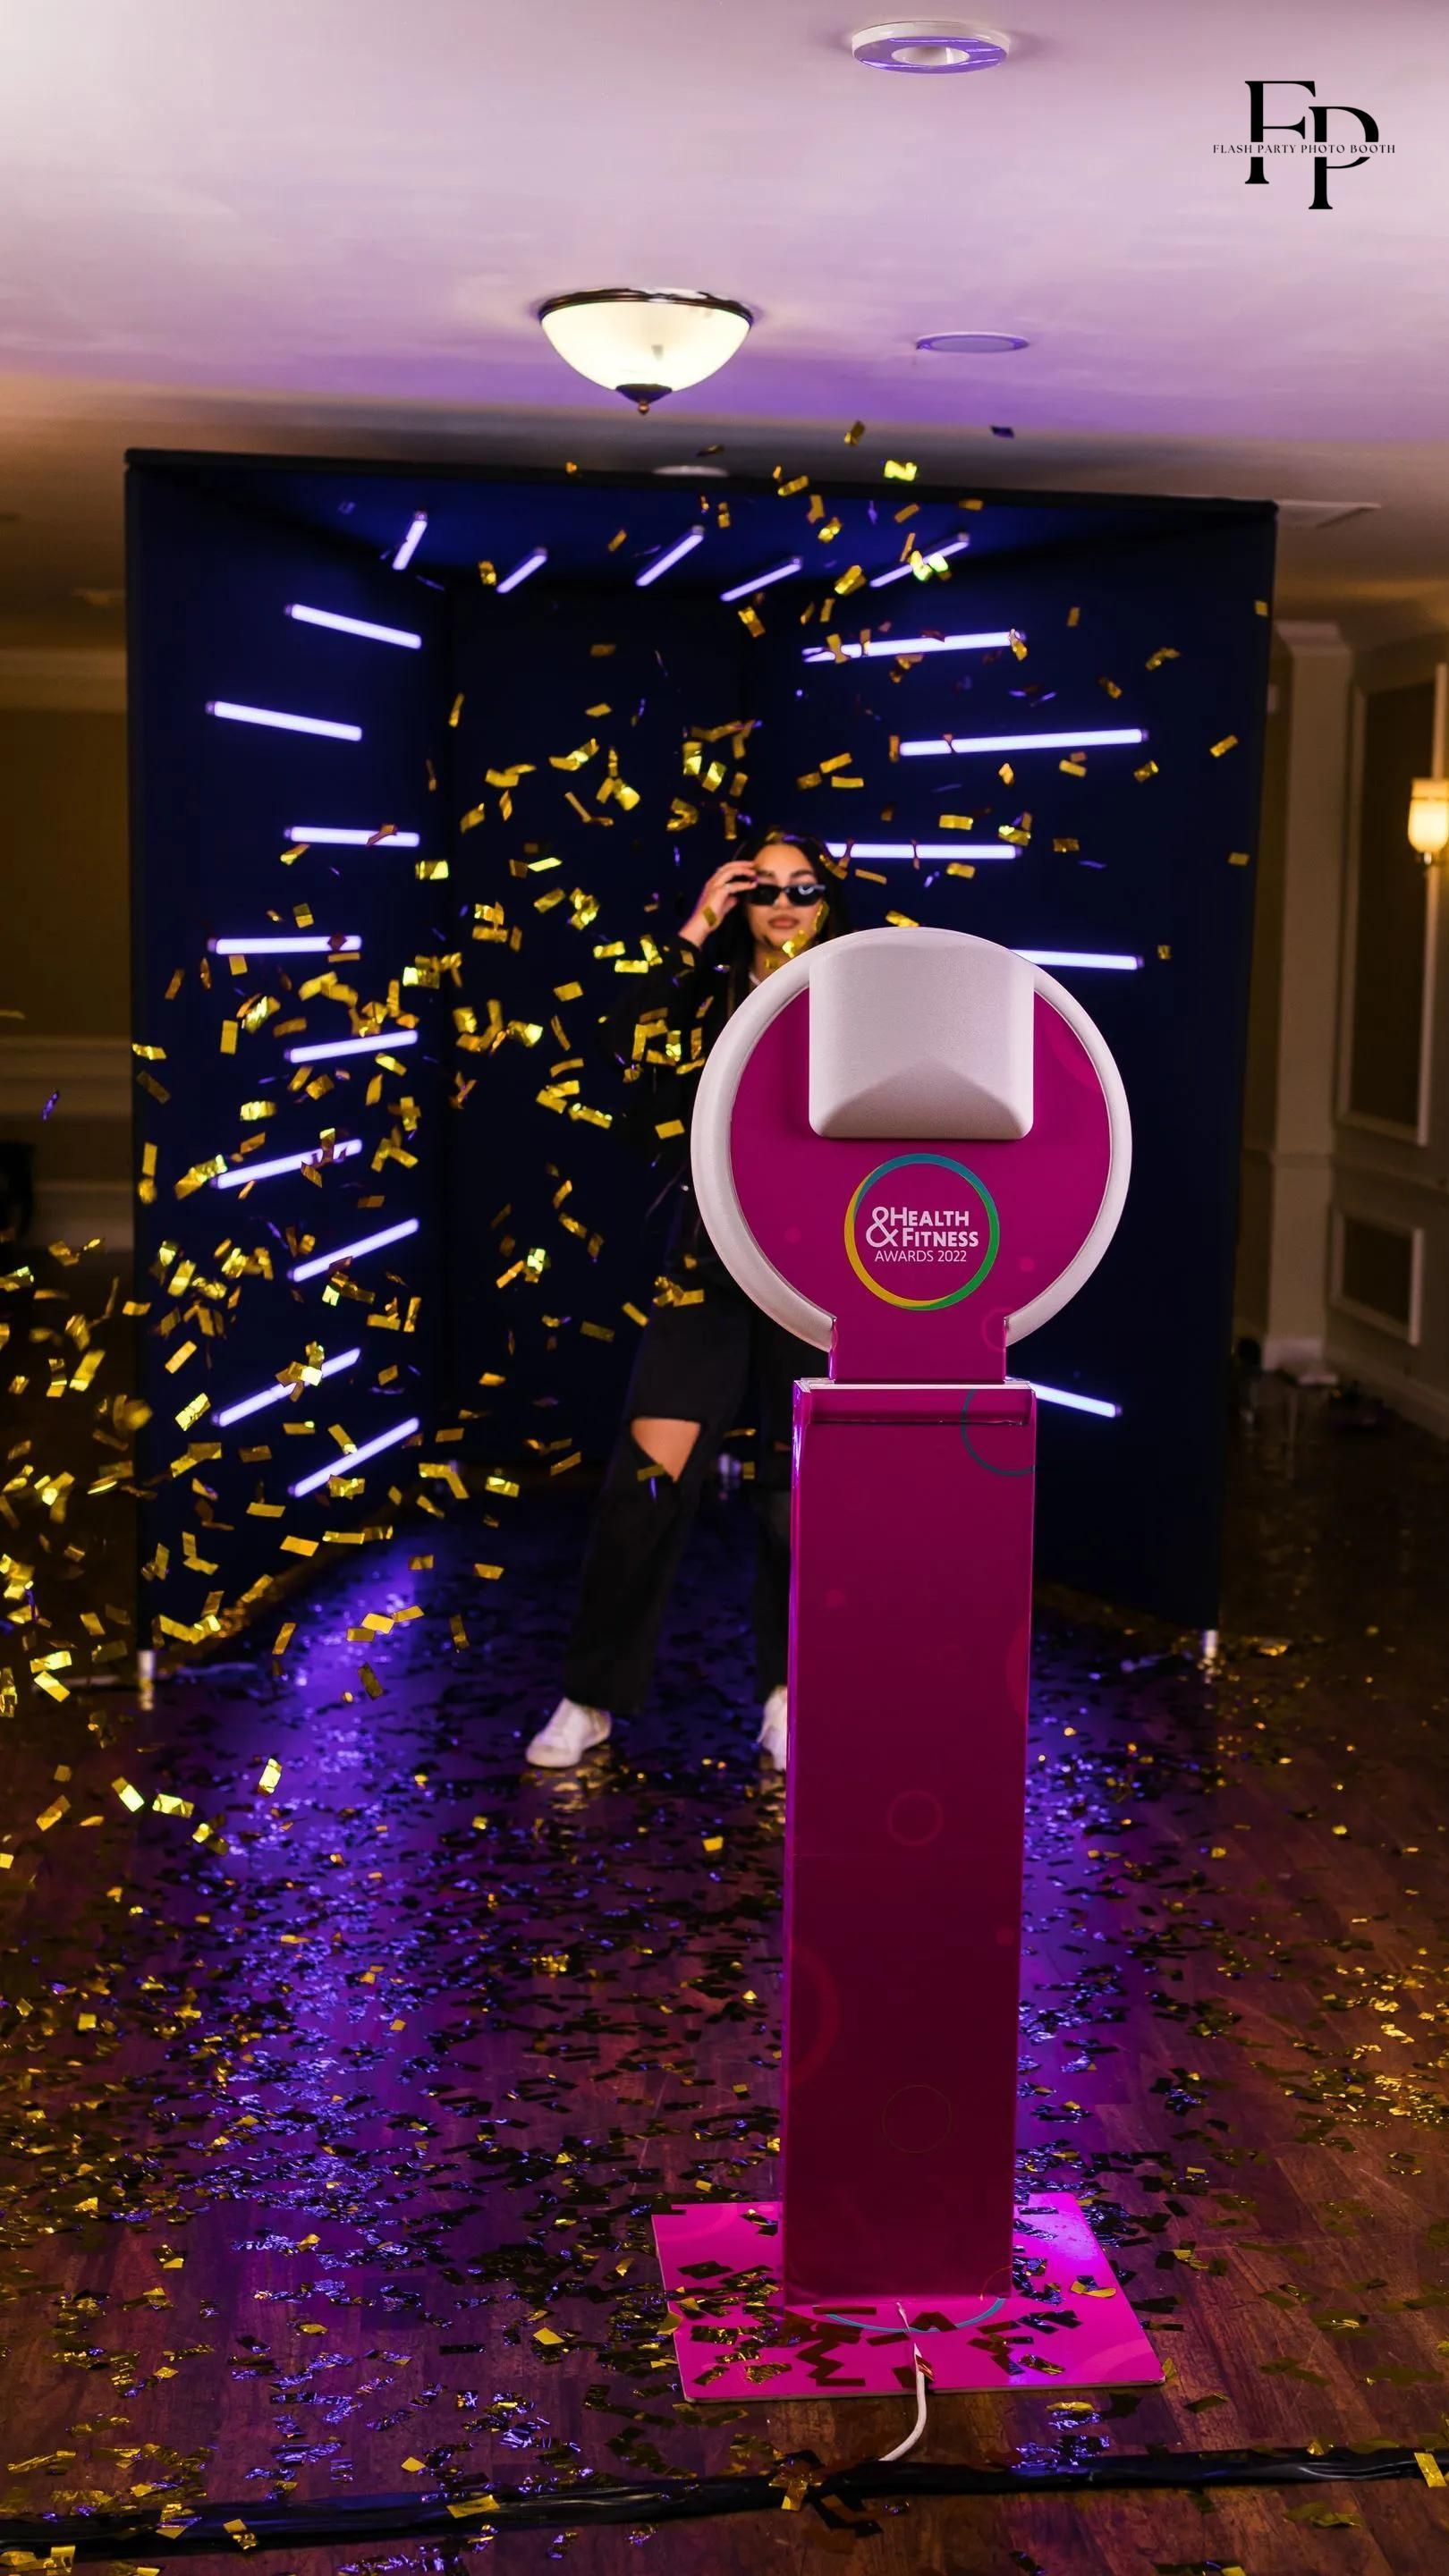 A woman standing in front of a pink Selfie Photo Booth as confetti falls around her.